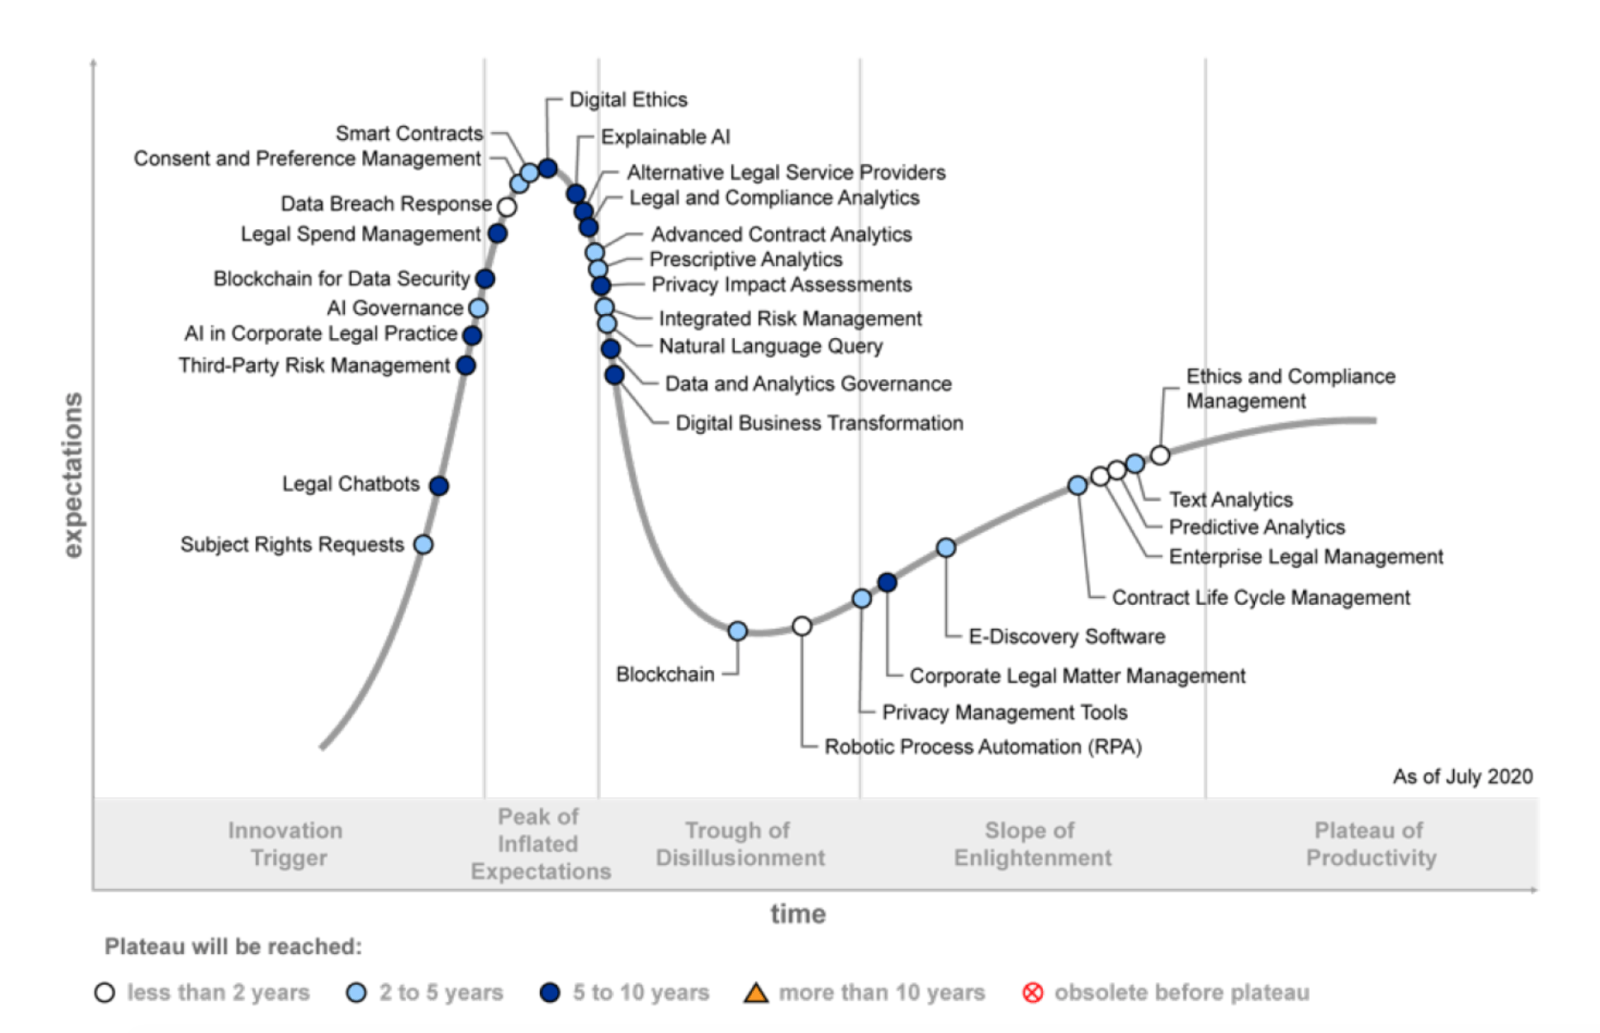 hype cycle for enterprise networking 2021